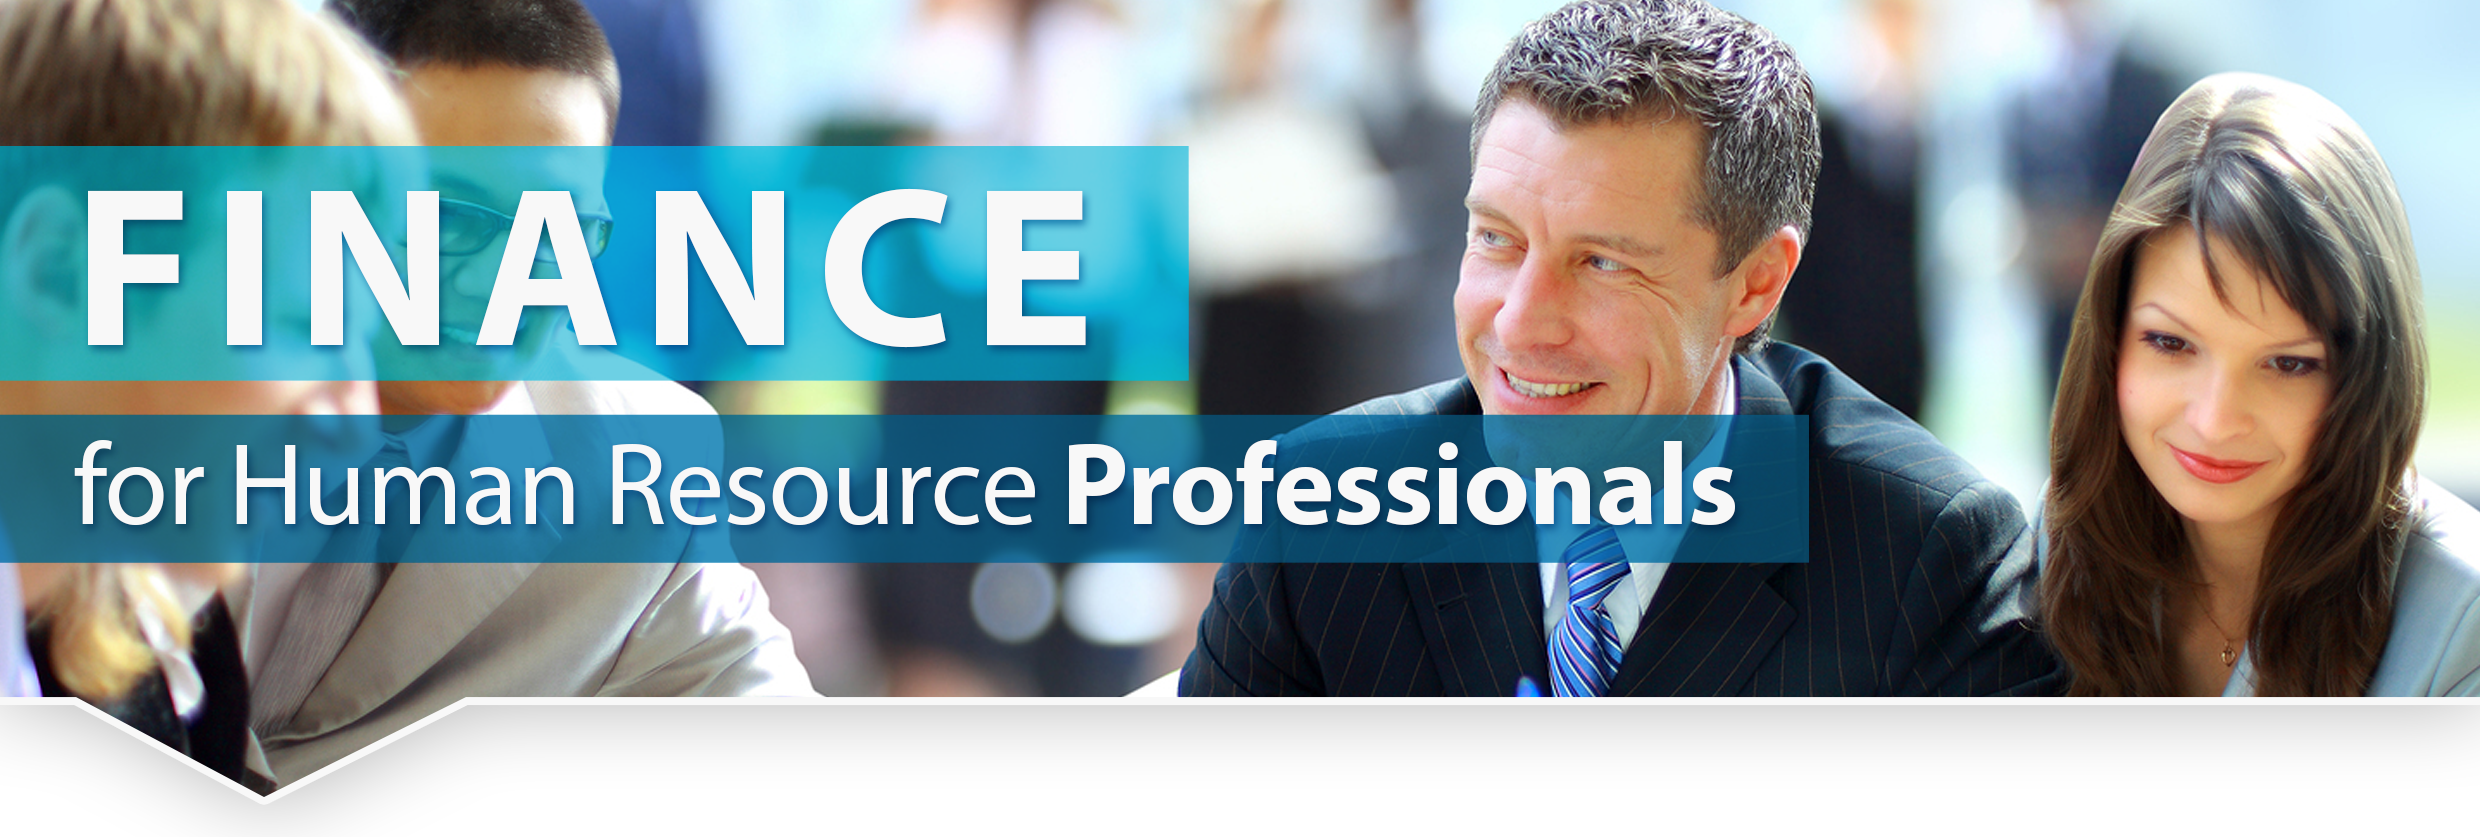 finance for human resource professionals)